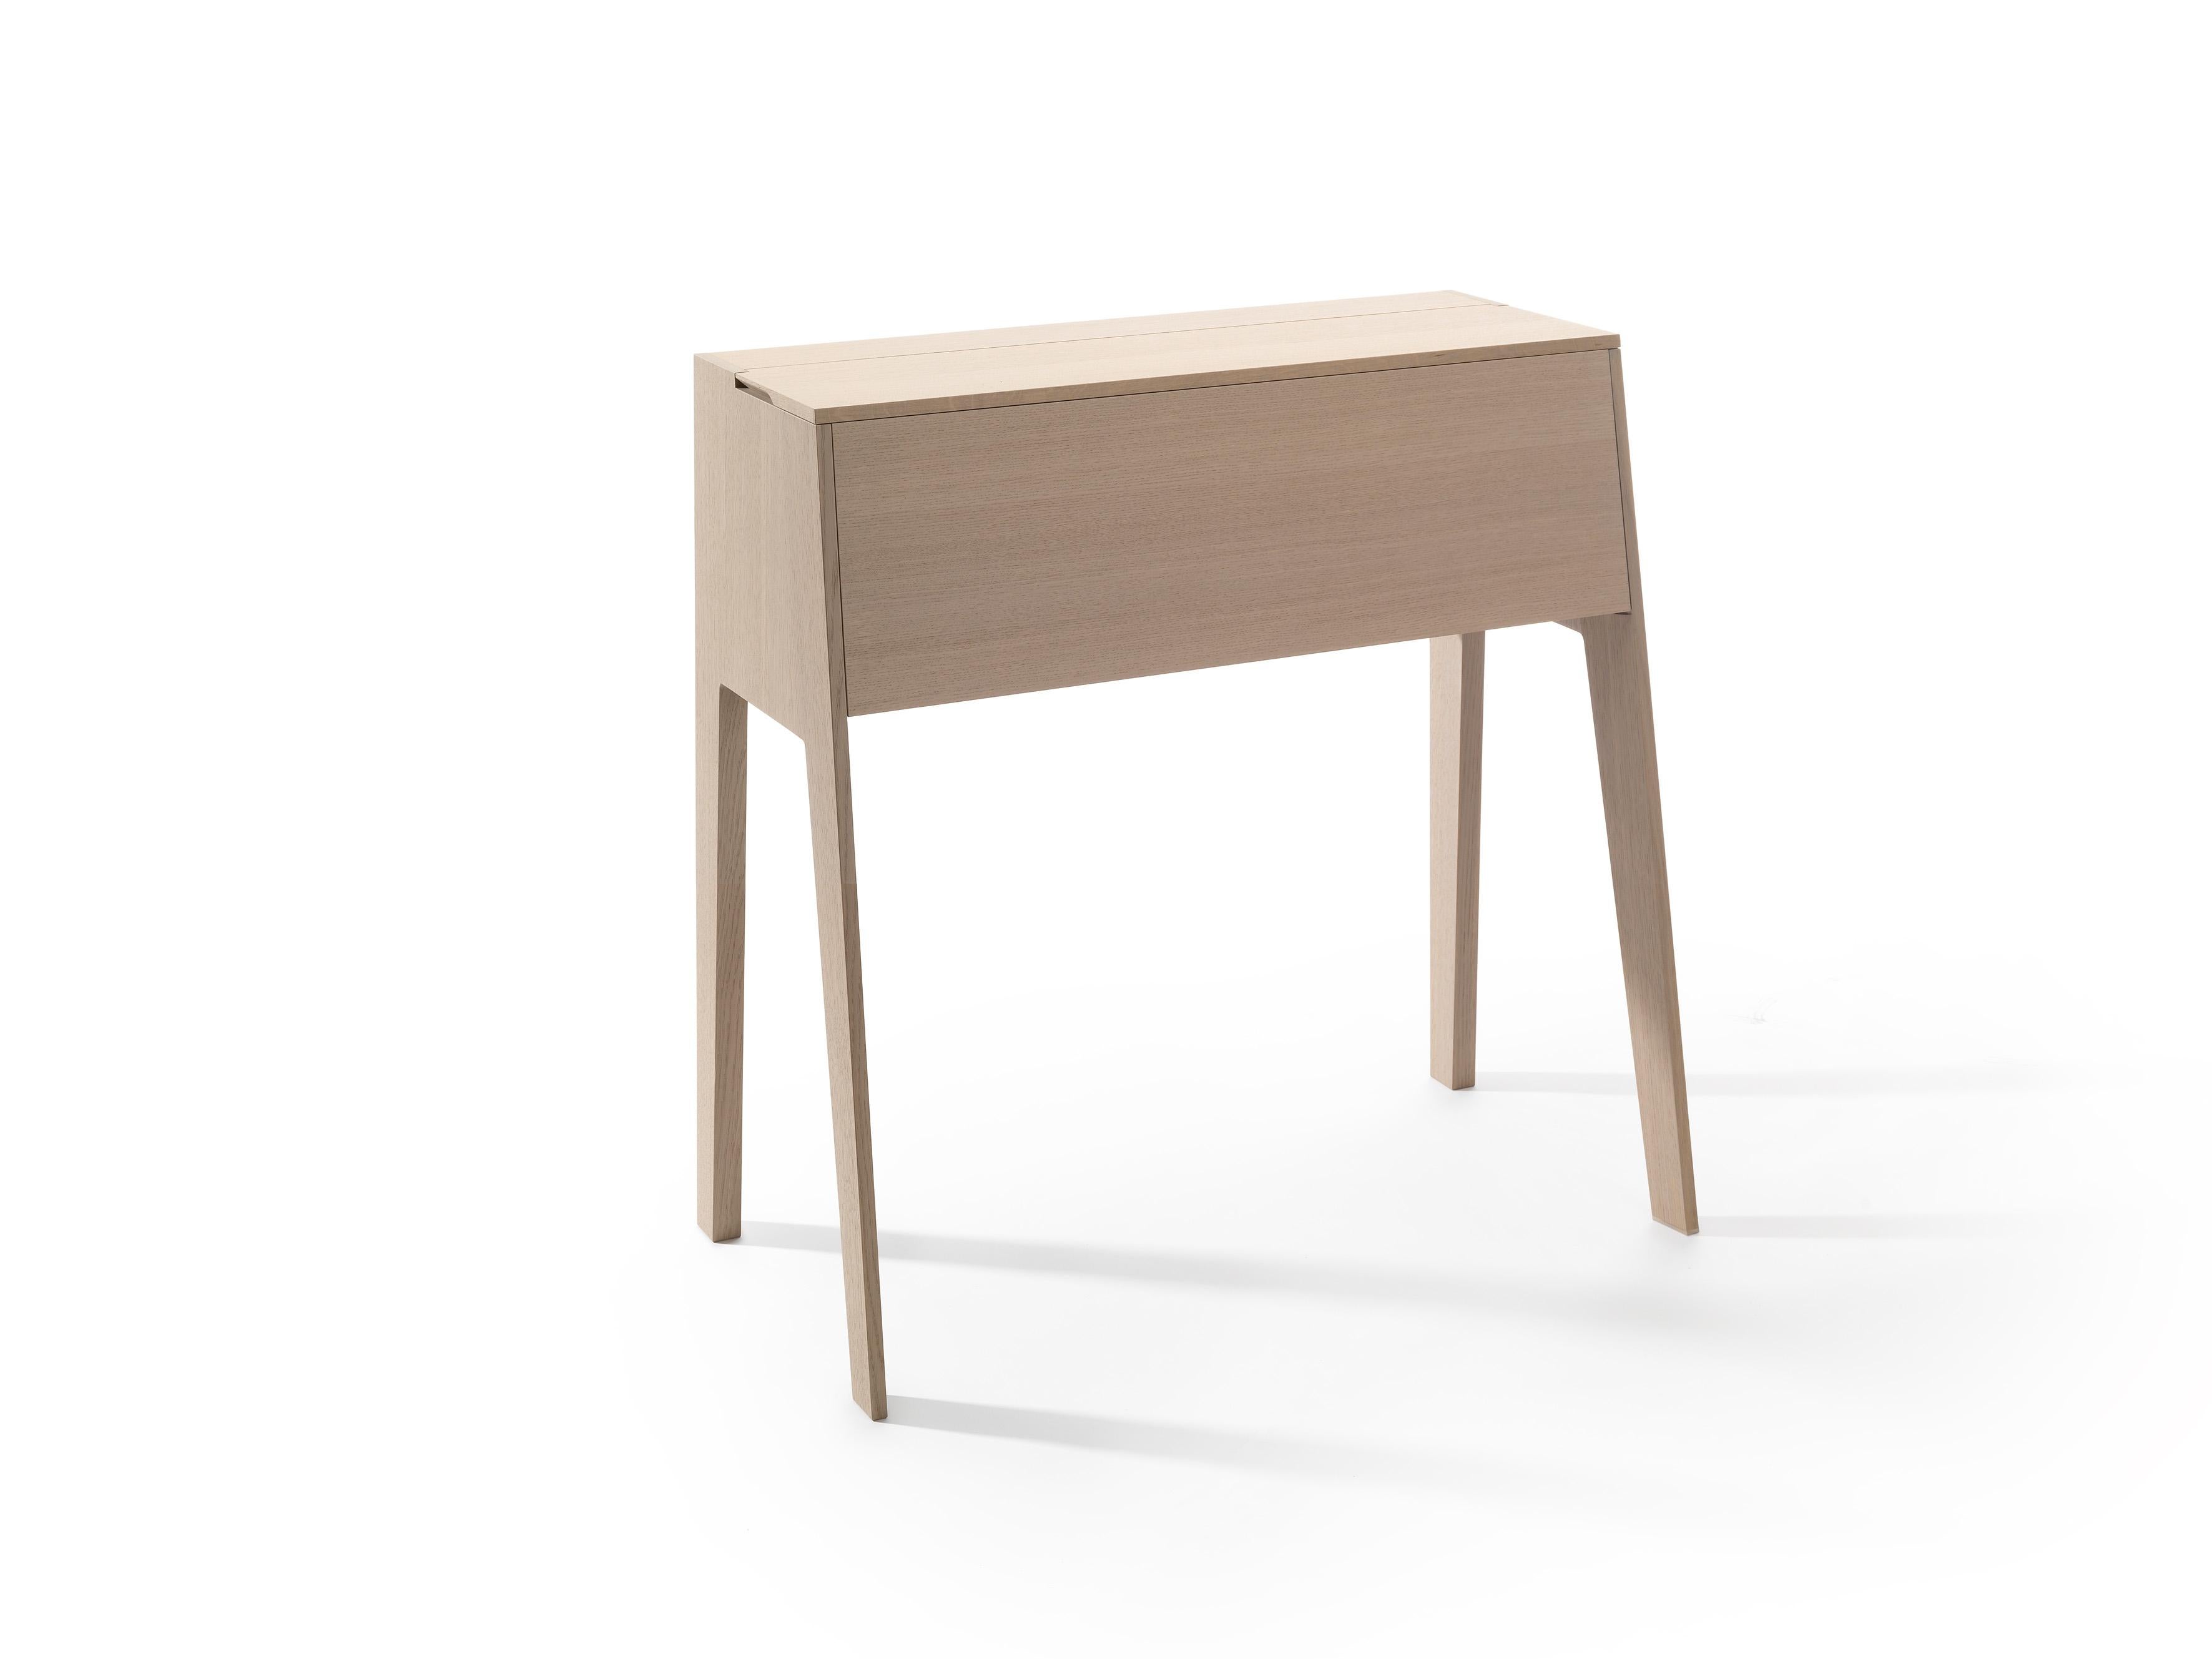 The graceful, yet functional desk. Here, Japanese form sensibility combines with the tradition of the writingdesk. A timeless model that will complement any furnishing style; it offers space for laptops of all sizes, cables and power supplies for